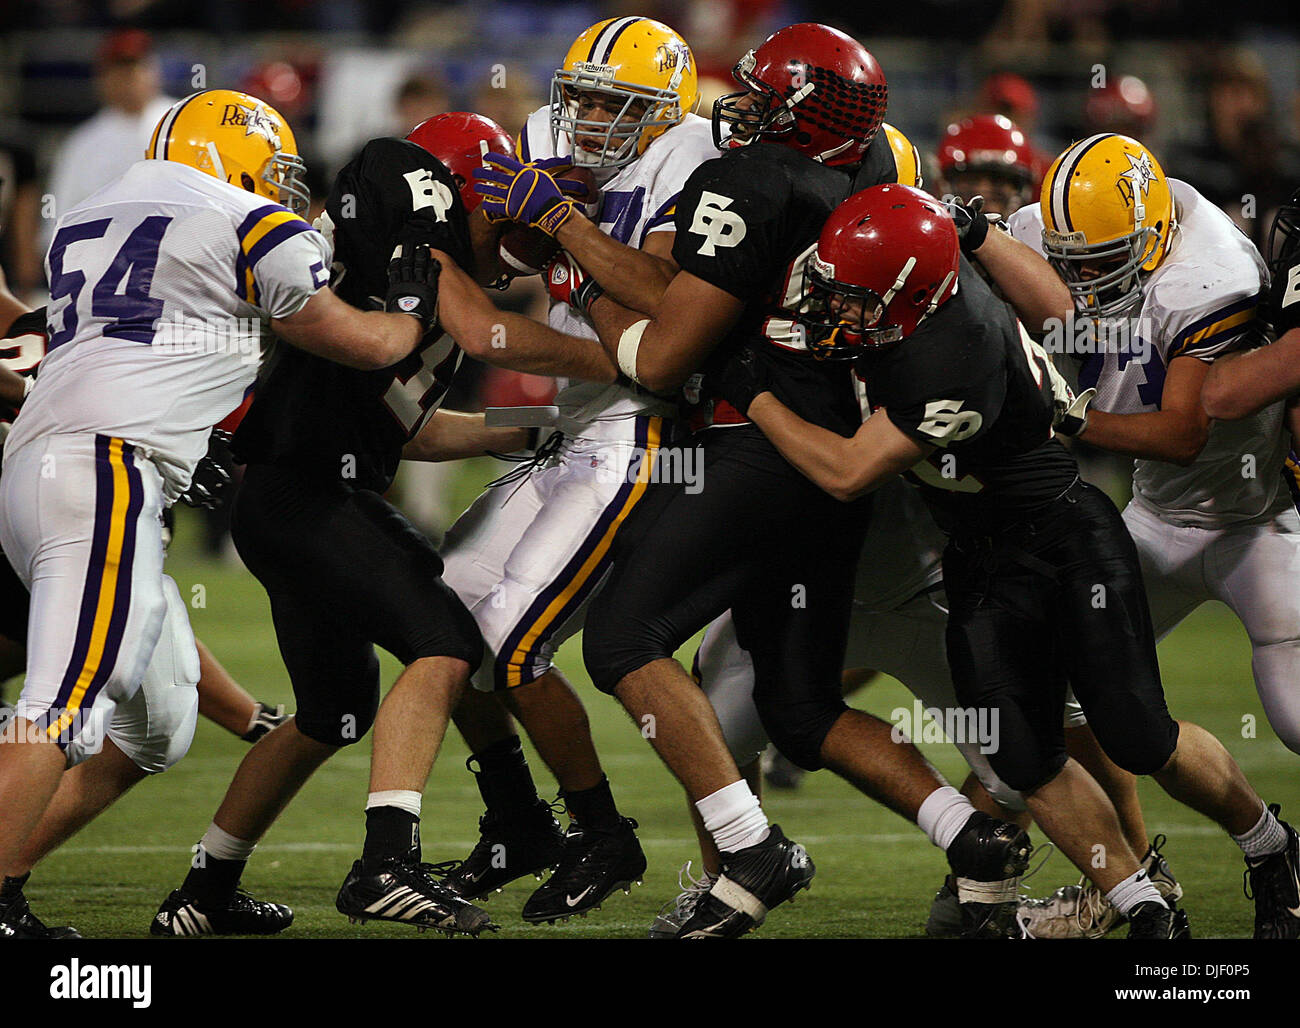 Nov 23, 2007 - Minneapolis, Minnesota, USA - Cretin-Derham Hall's SHADY SALAMON was tackled by three Eden Prairie defenders in the second half. Eden Prairie won the game 50-21 victory to capture the Class 5A Championship at the 2007 Minnesota State High School State Football Tournament at the Metrodome Friday, November 23.  (Credit Image: © Jim Gehrz/Minneapolis Star Tribune/ZUMA P Stock Photo